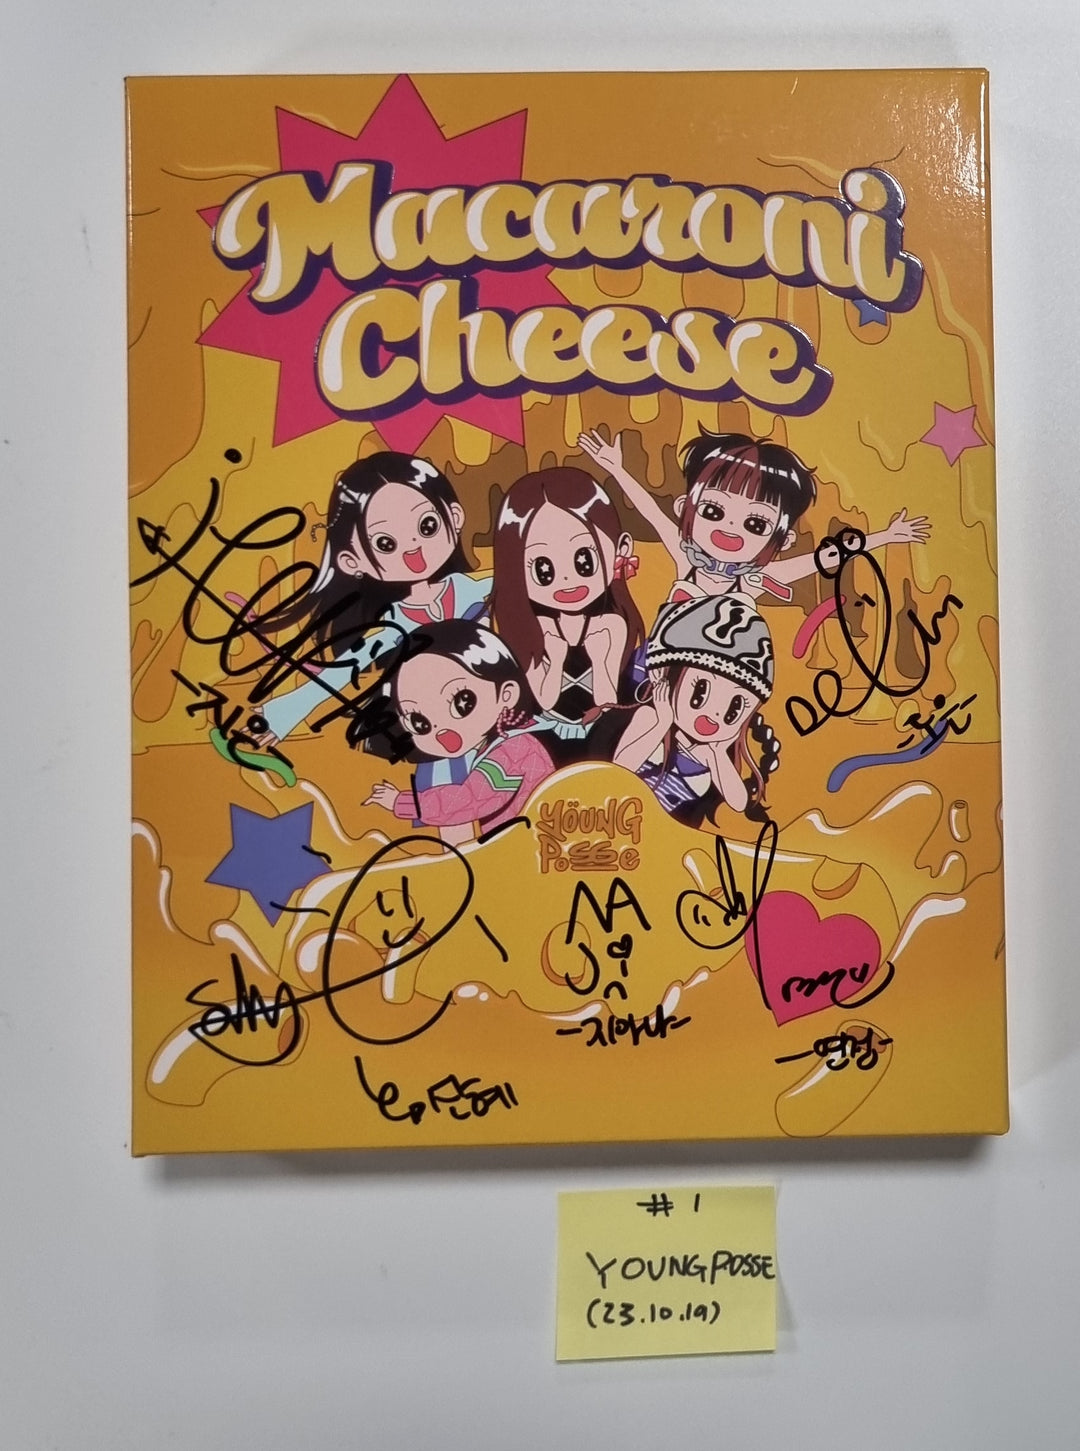 YOUNG POSSE "MACARONI CHEESE" - Hand Autographed(Signed) Promo Album [23.10.19]